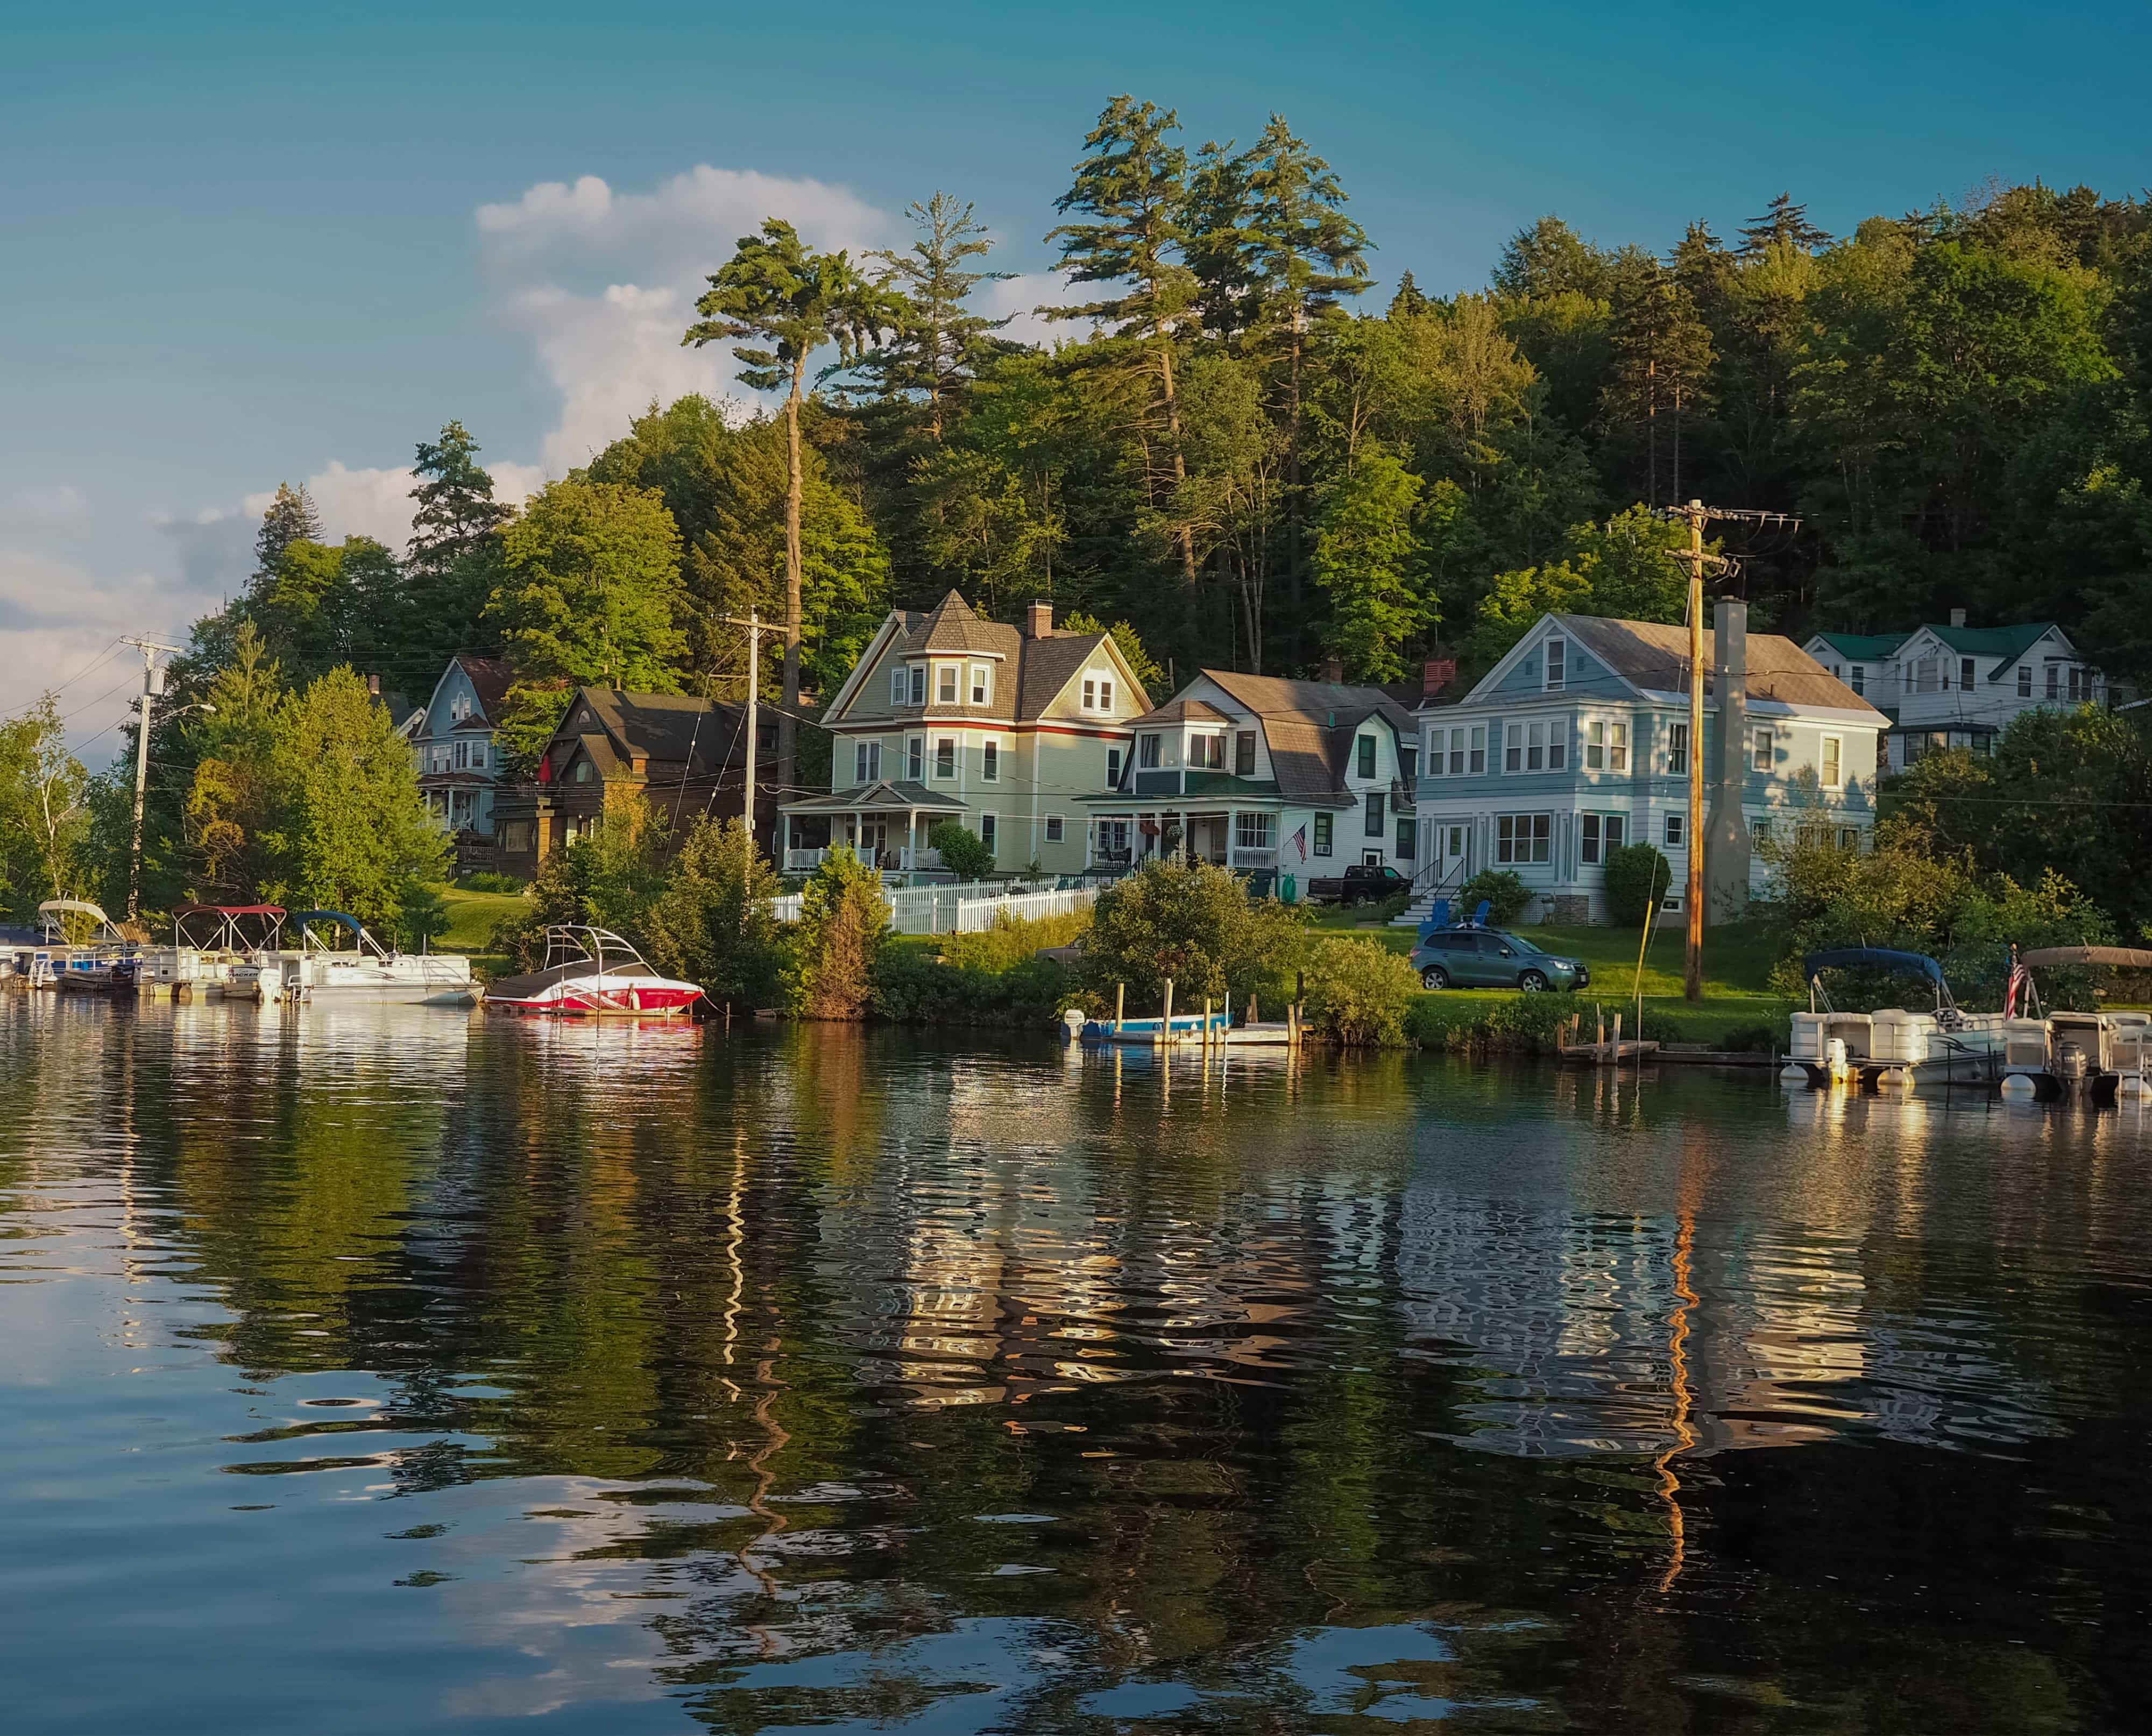 Beautiful houses situated on the shore of a beautiful lake